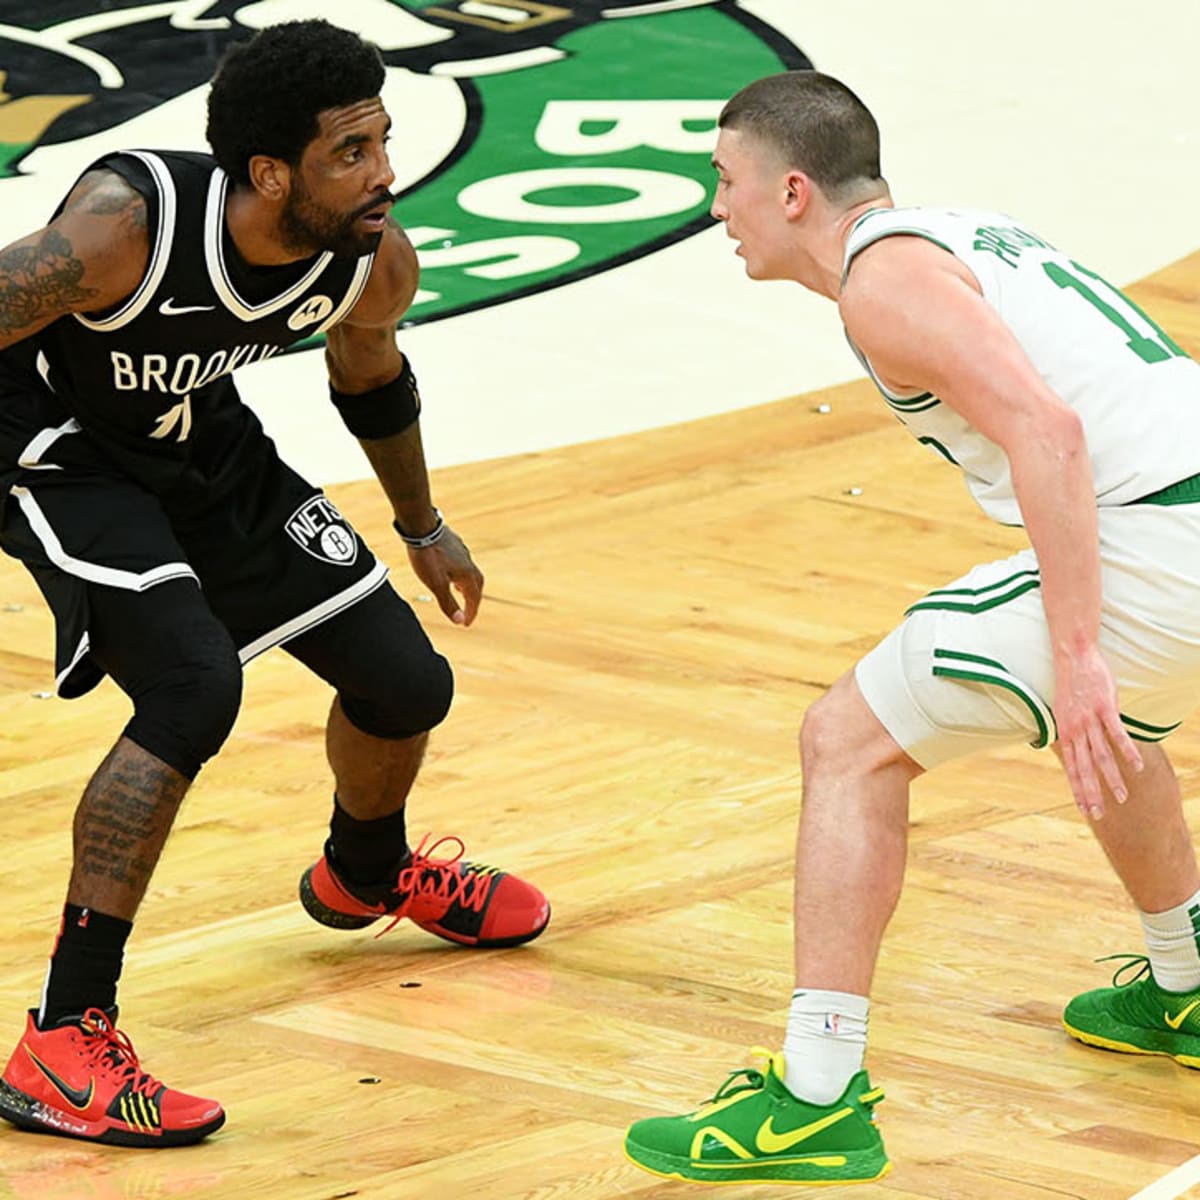 Kyrie Irving stepping on Celtics logo is not worth reaction from fans -  Sports Illustrated